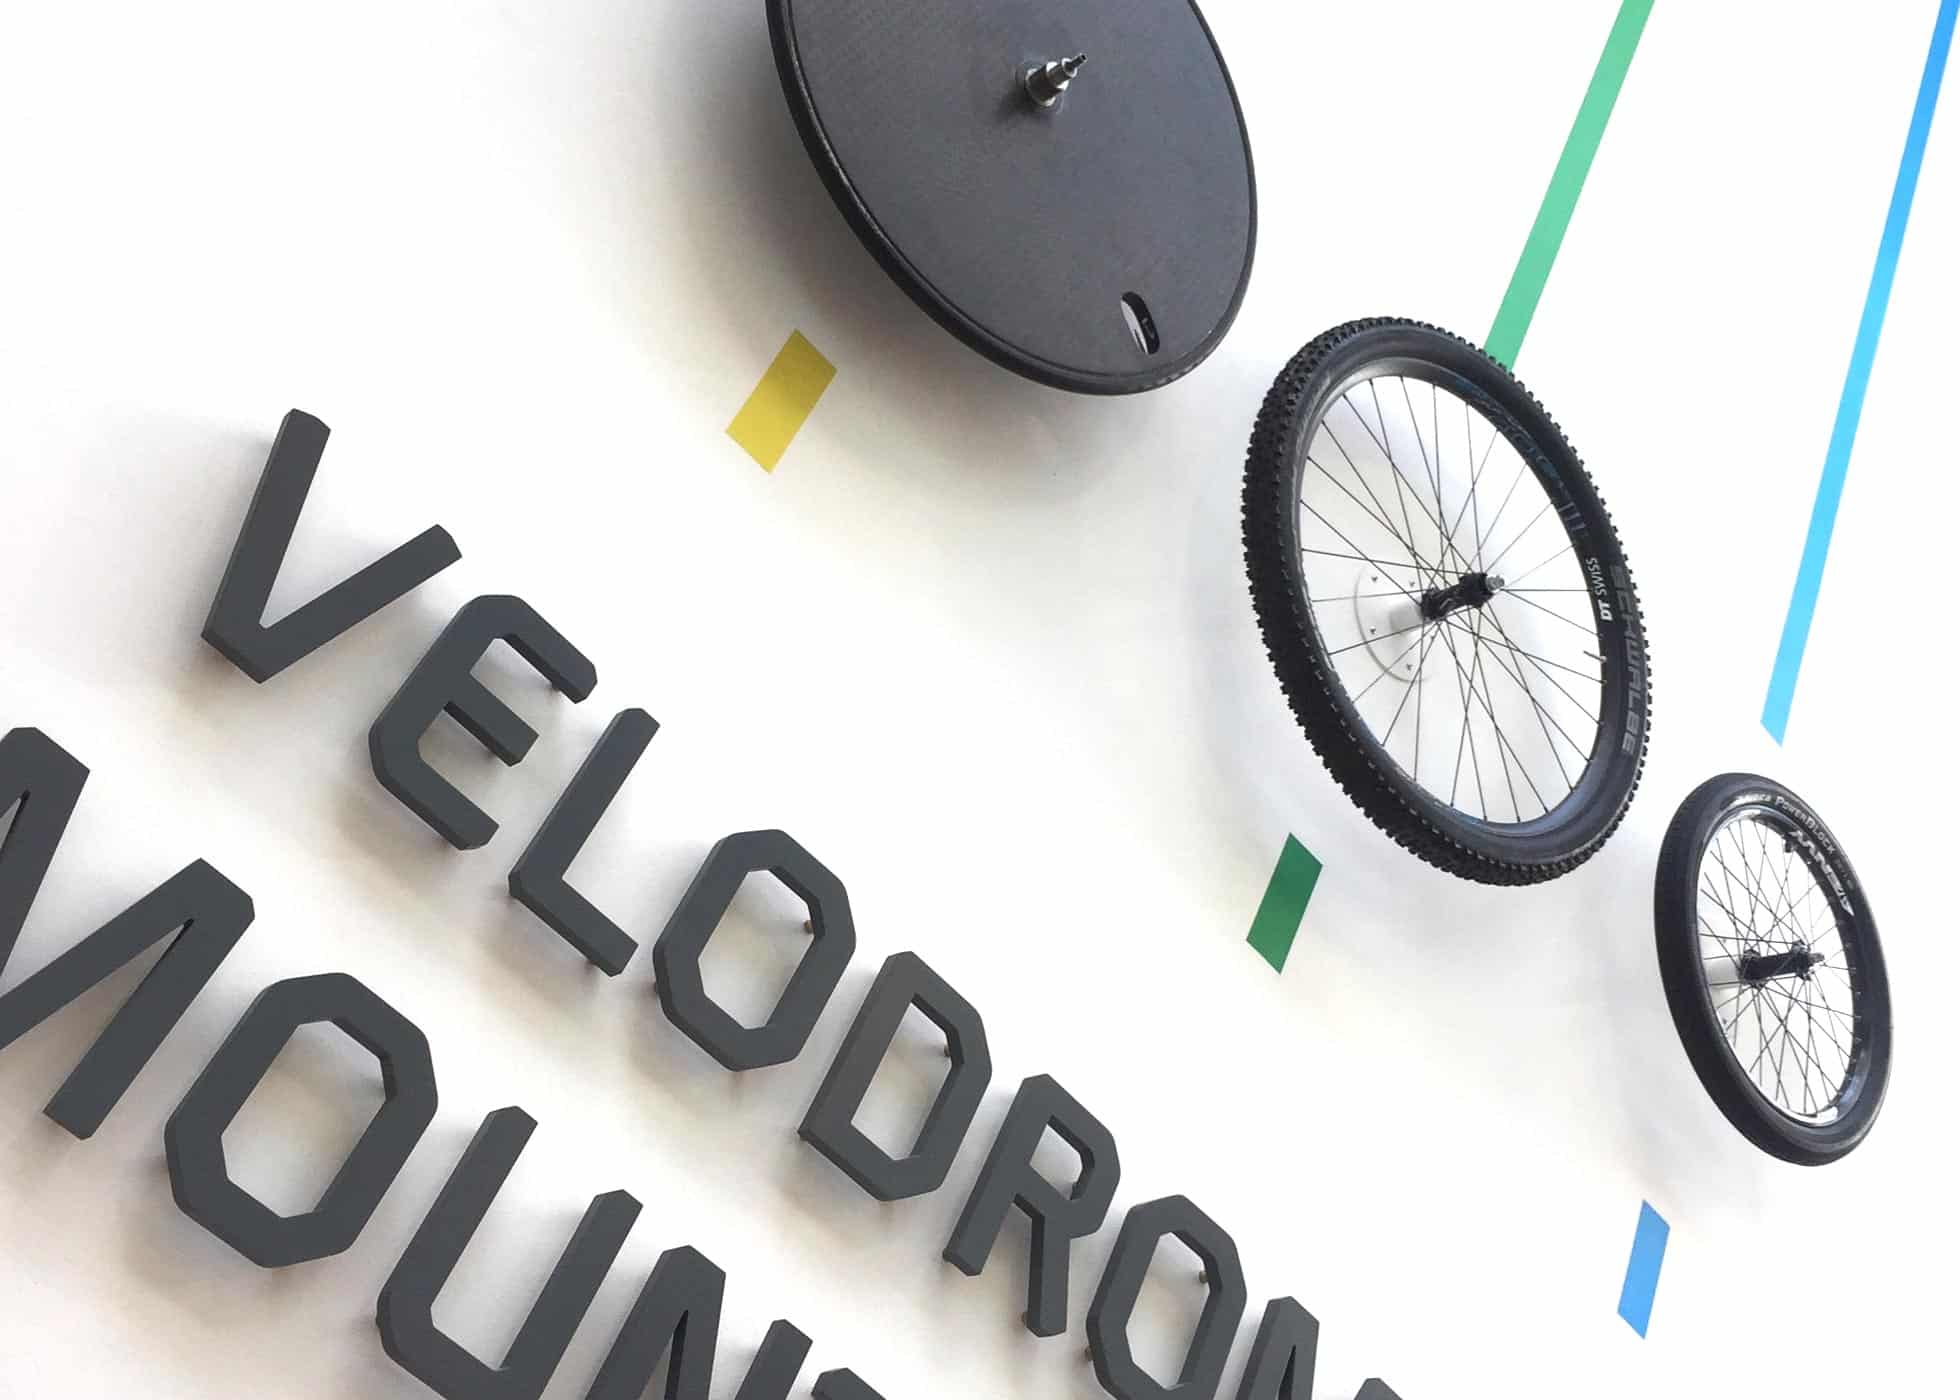 Velodrome Sign With Mountain Bike & BMX Wheels On Wall